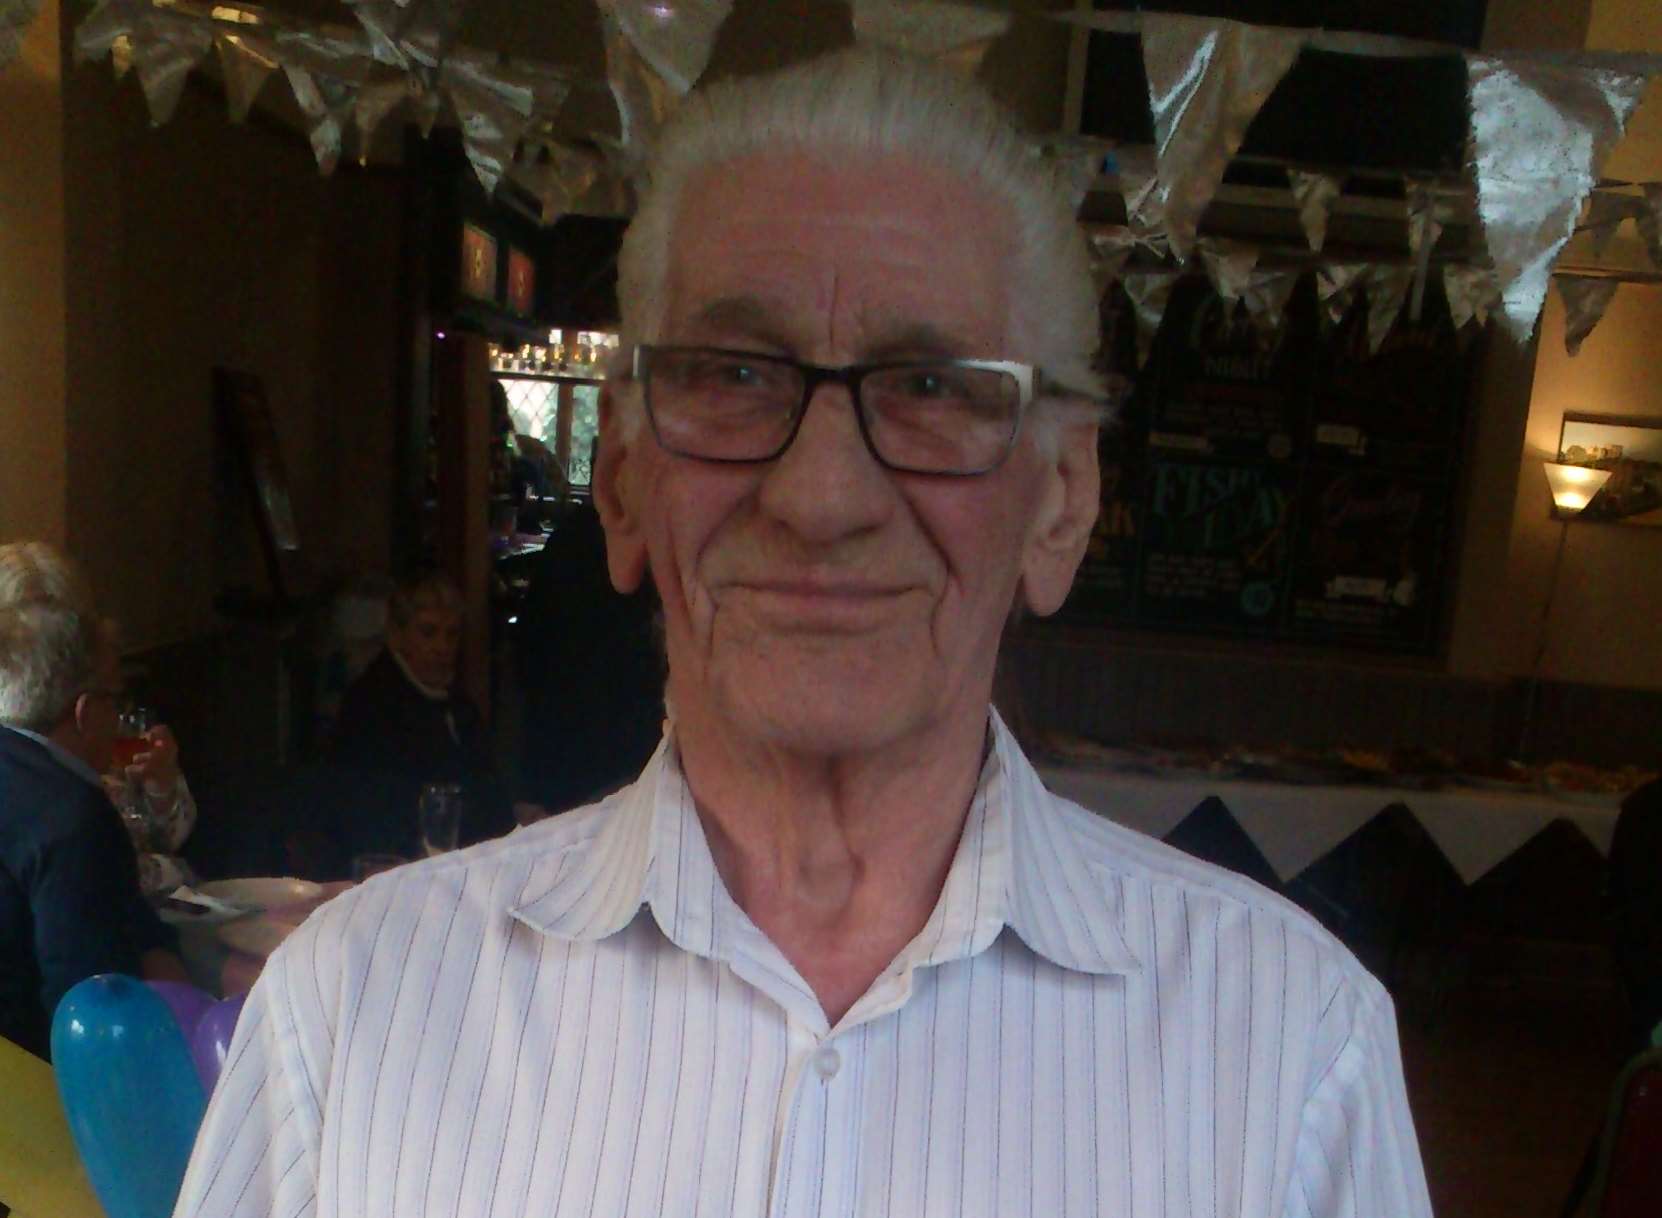 John Whicker, 85, has been volunteering as a driver for the Thanet Volunteer Bureau for 25 years